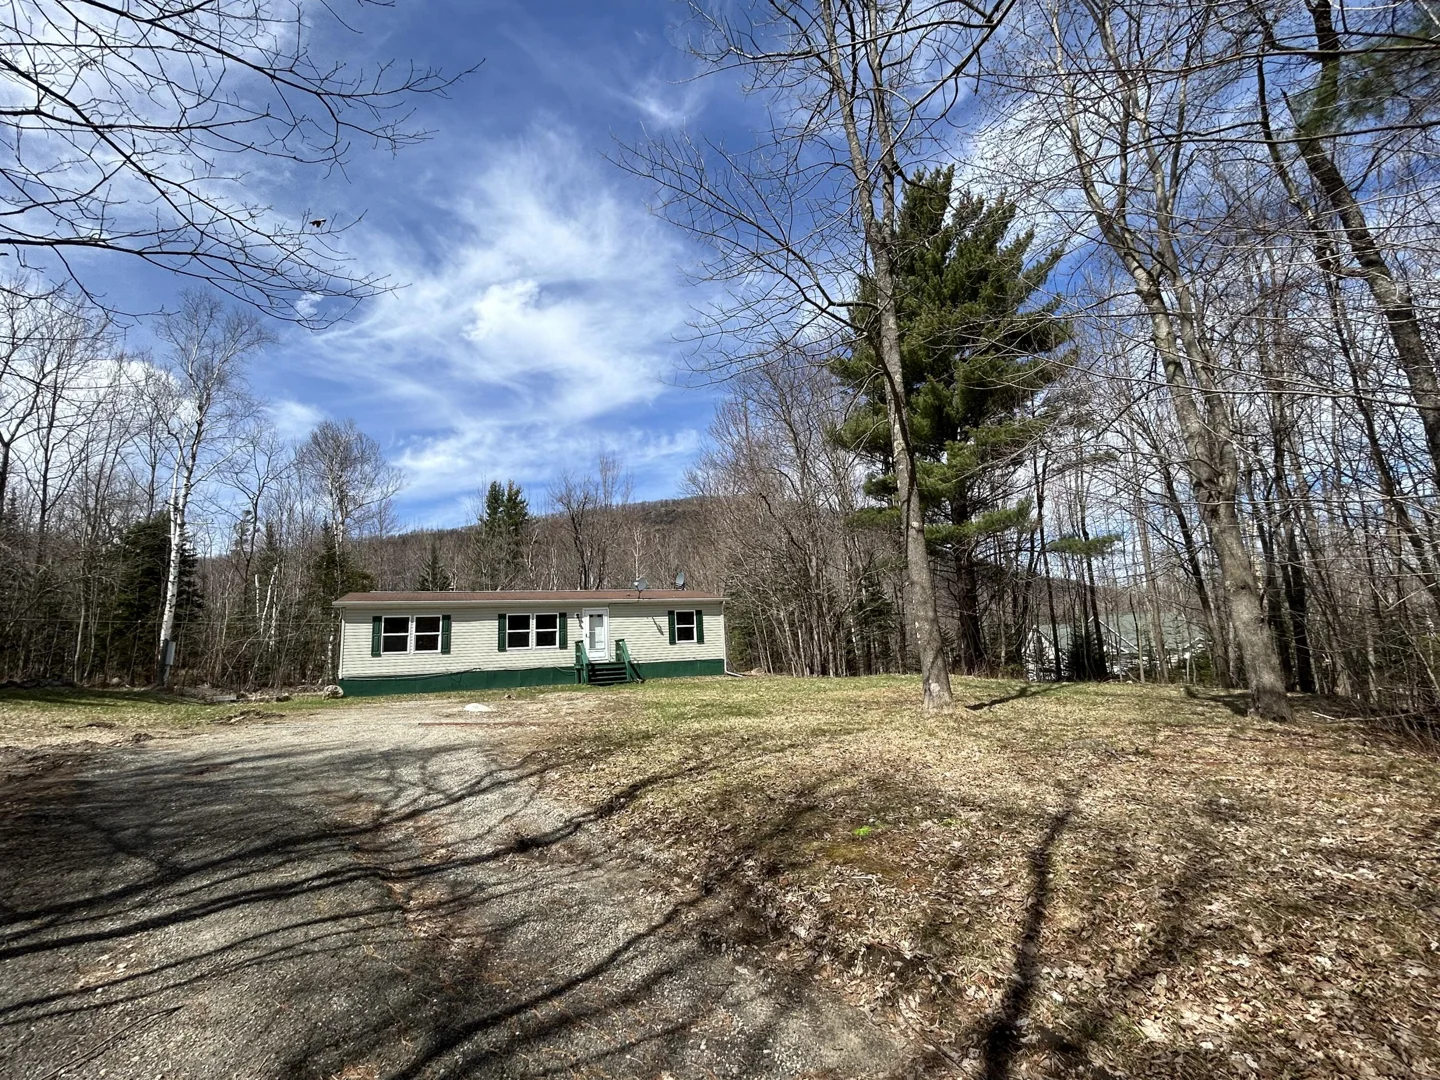 10 Acres in the Adirondacks with a spacious 3 BR, 2 BA home